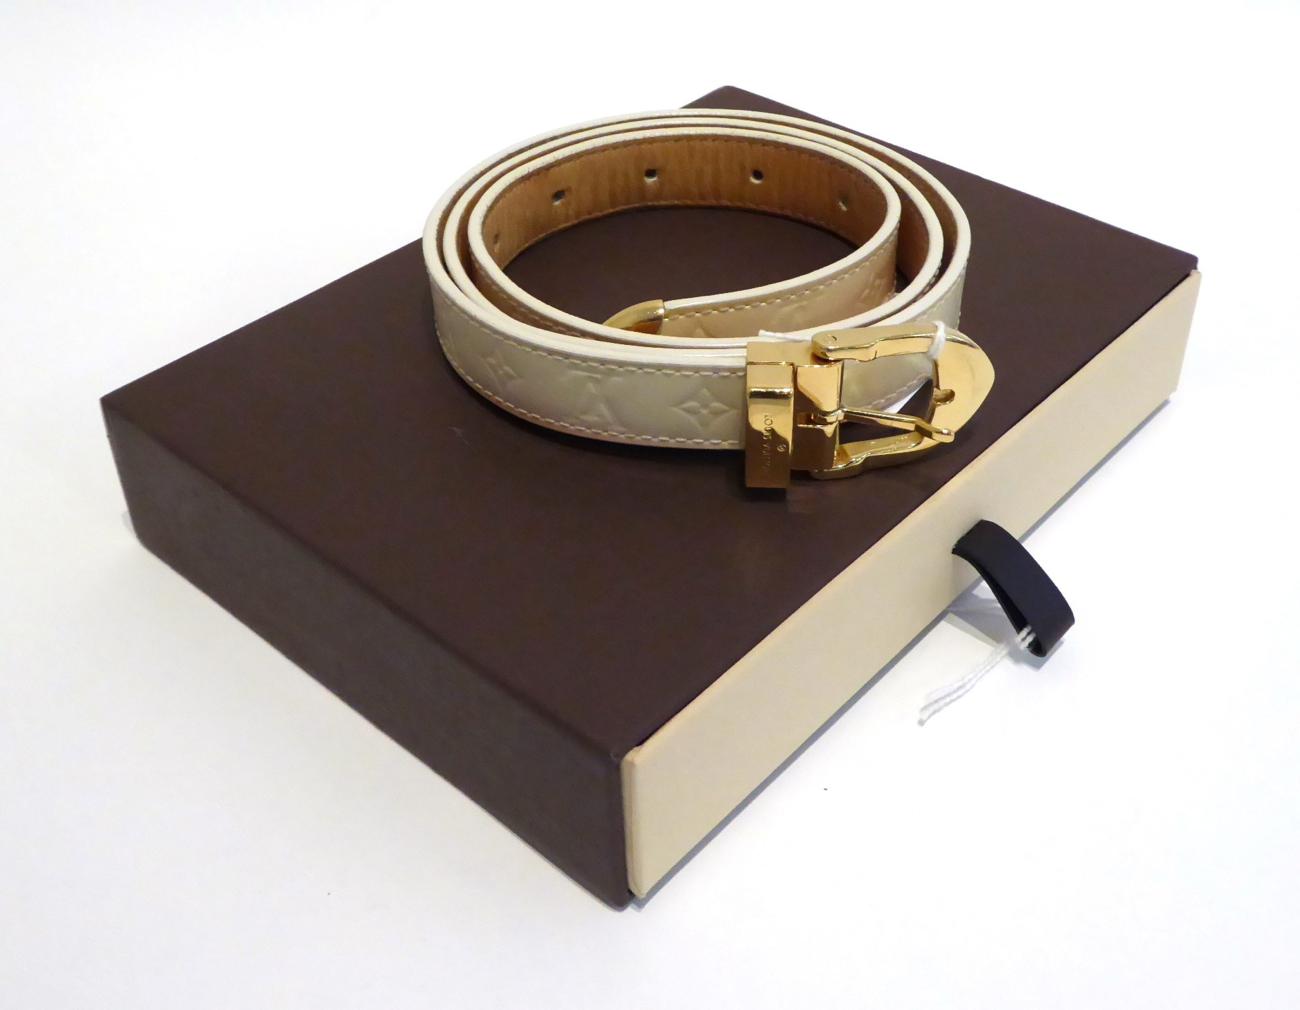 Lot 2138 - Louis Vuitton Patent Cream Skinny Belt, with embossed LV pattern, 90cm long, with original box